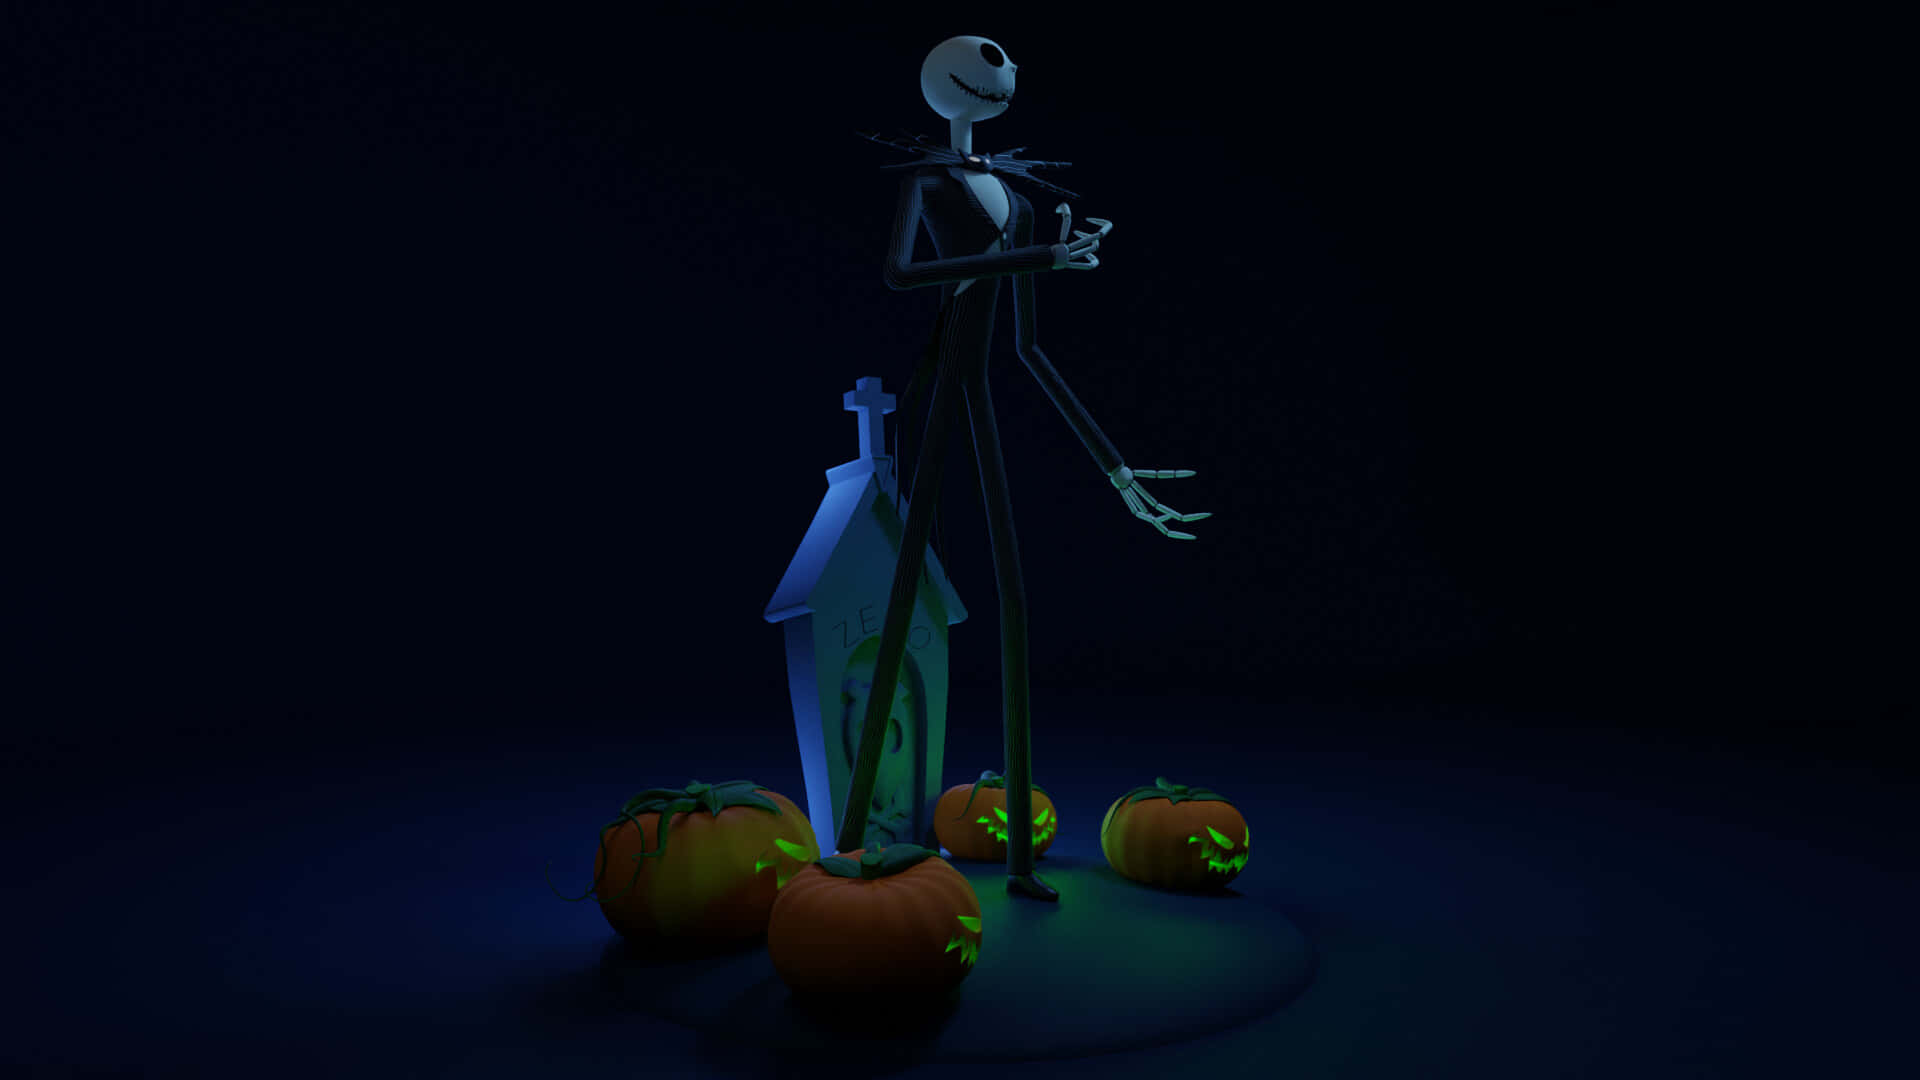 Jack Skellington from the classic Tim Burton film, The Nightmare Before Christmas